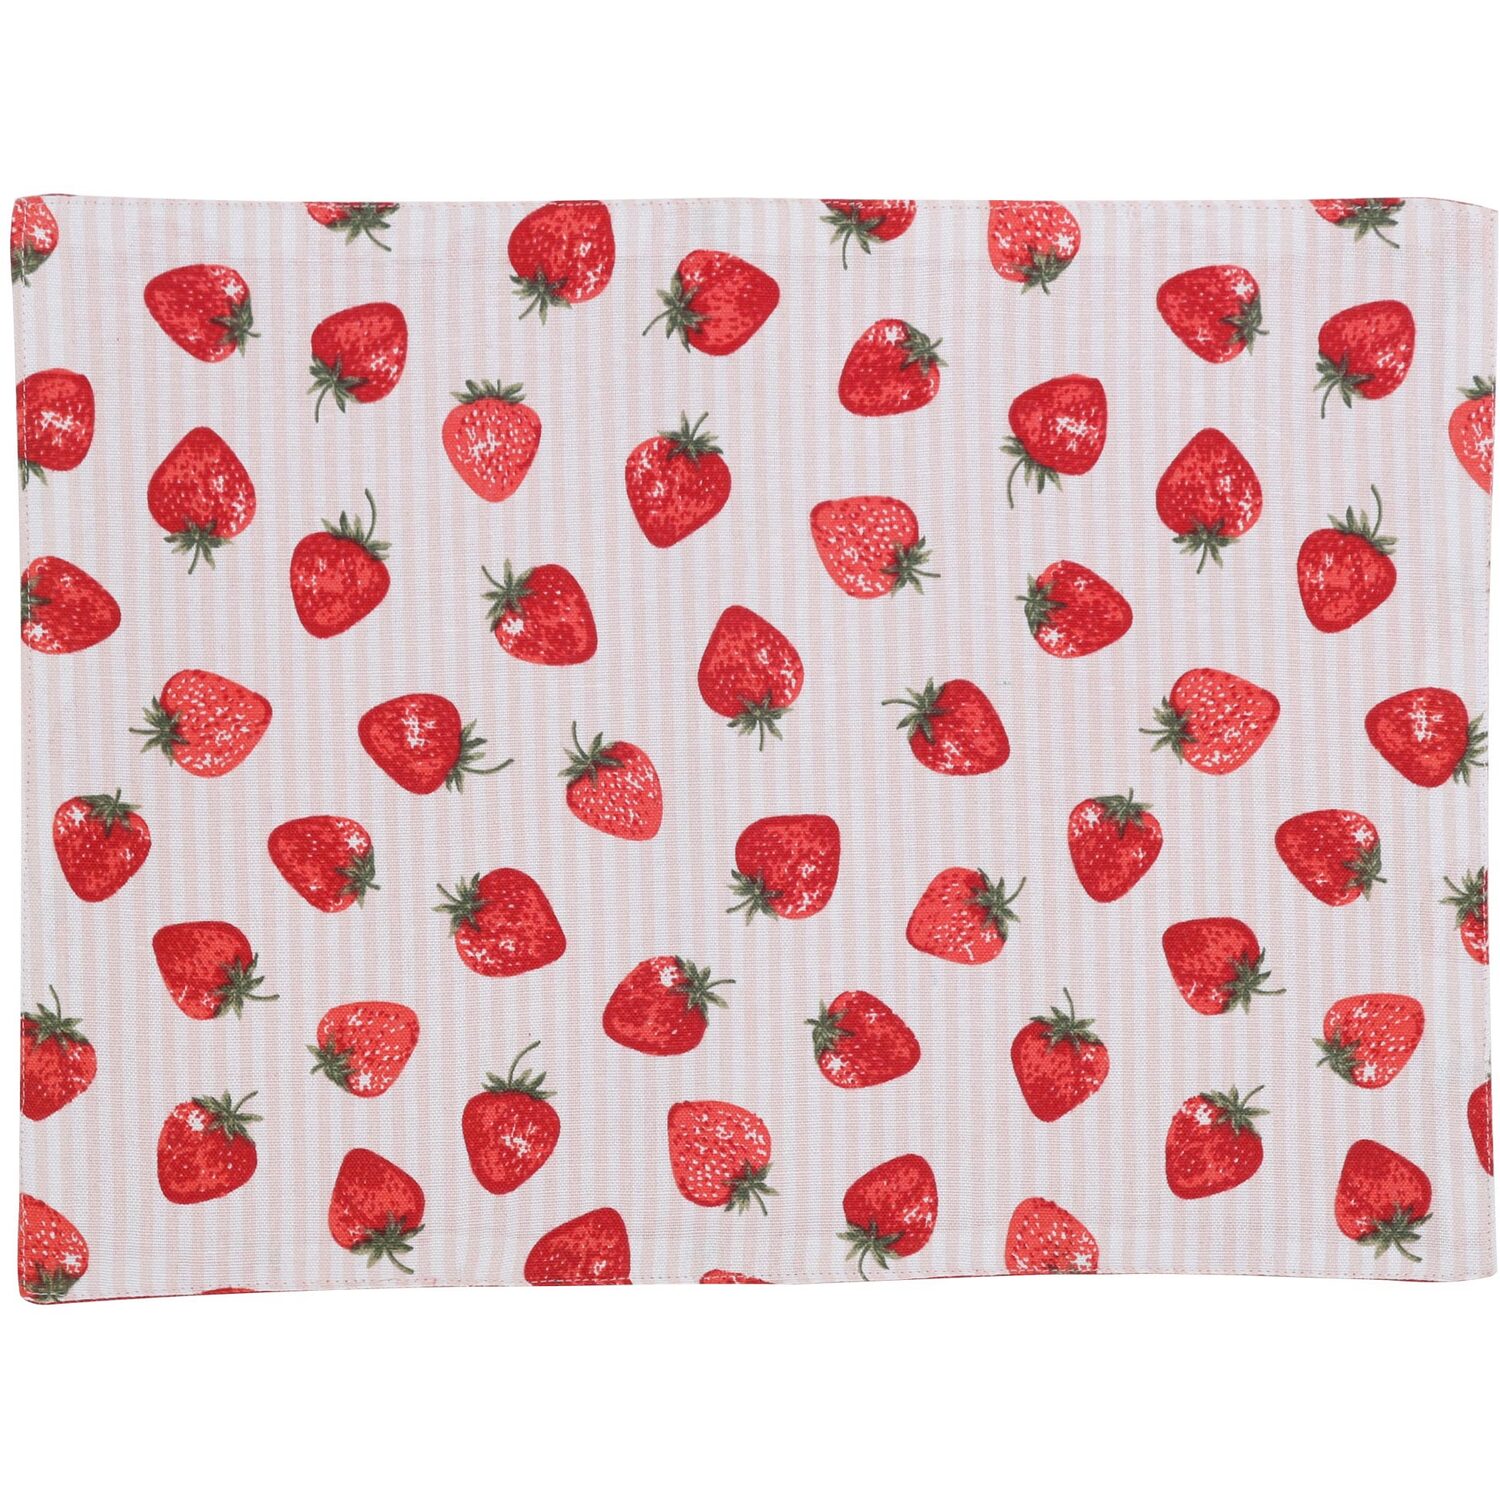 Pack of 2 Strawberry Placemats - Red Image 1